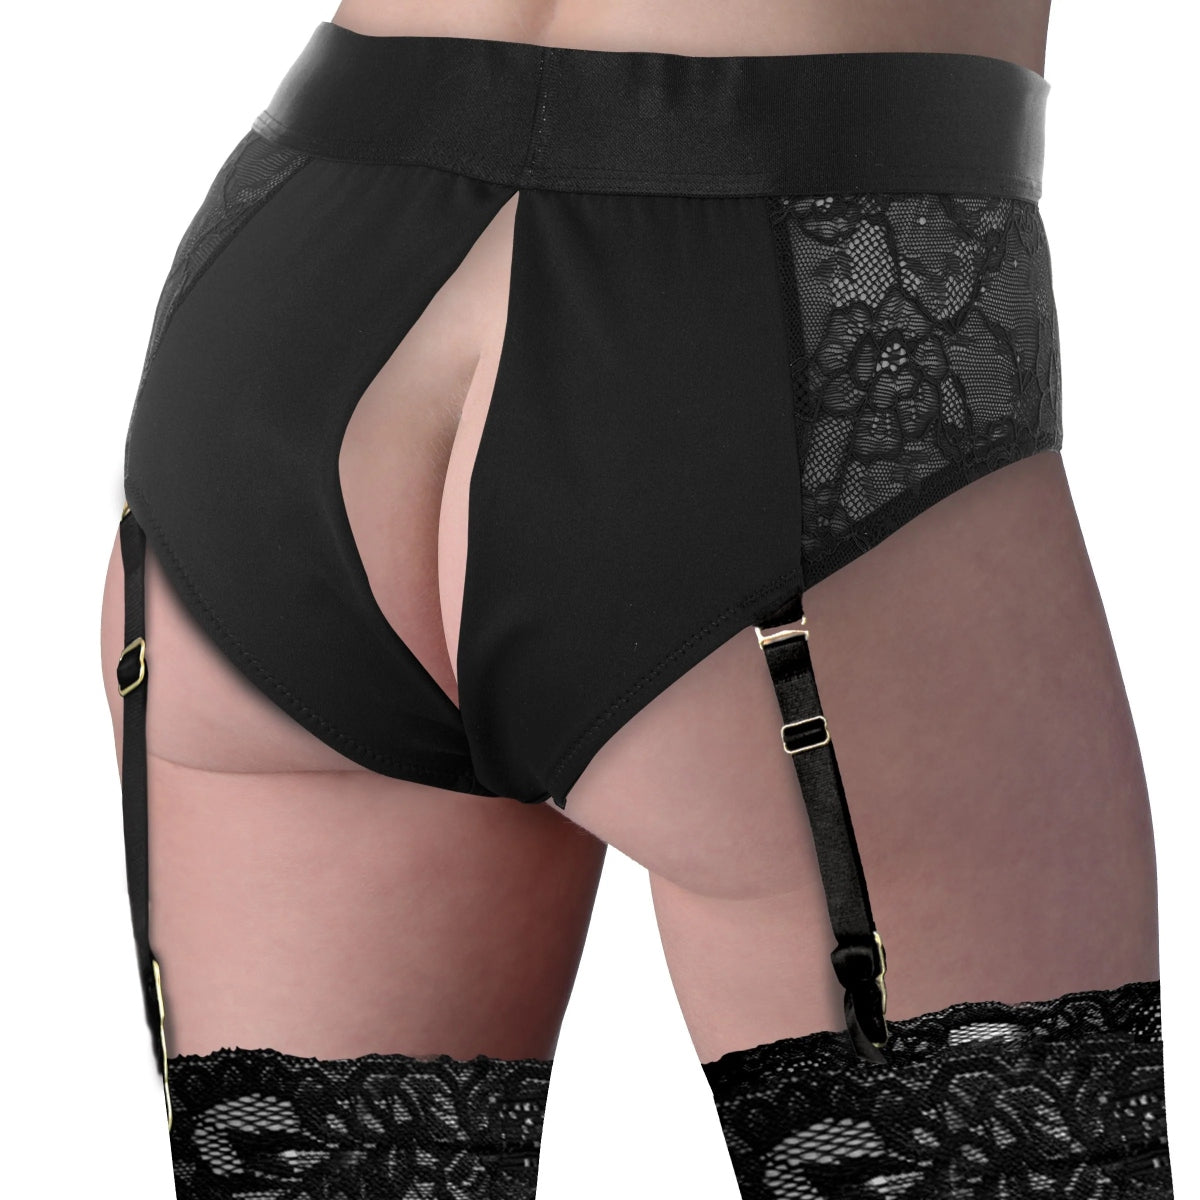 Strap U Laced Seductress Lace Crotchless Panty Harness With Garter Straps Black Small Medium